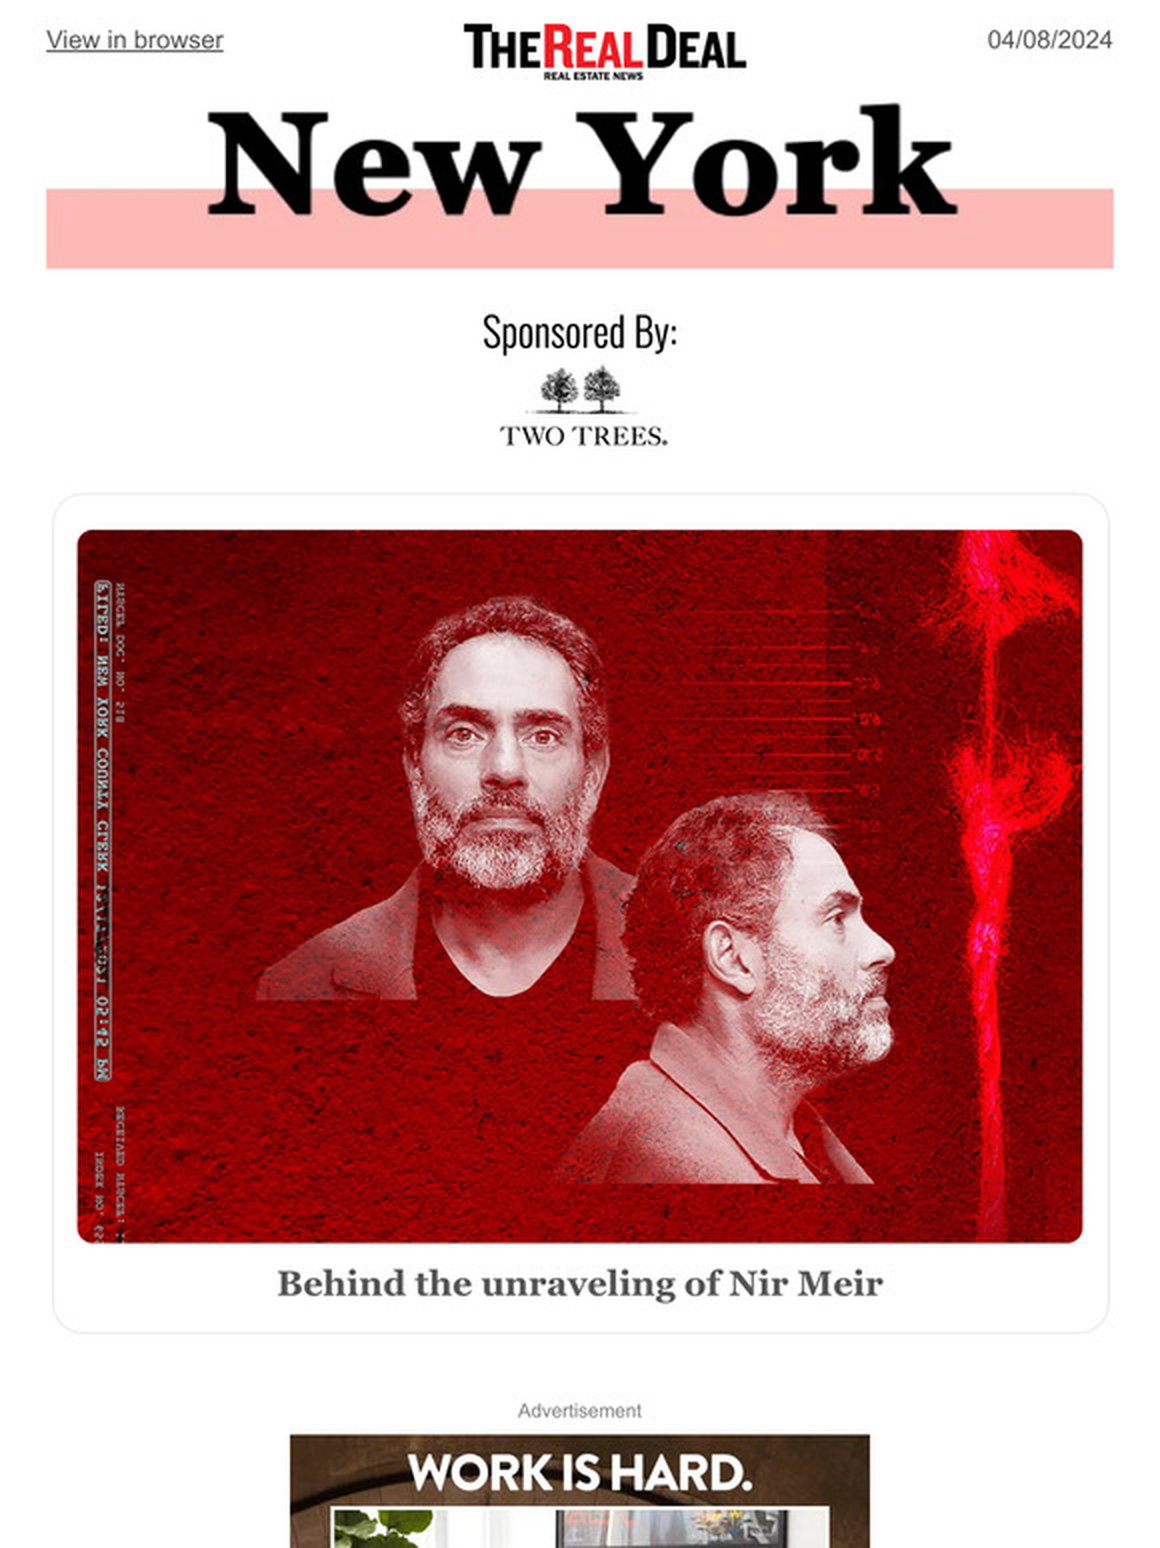 Behind Nir Meir's unraveling; Jeff Sutton on the deals that launched his empire ... and more